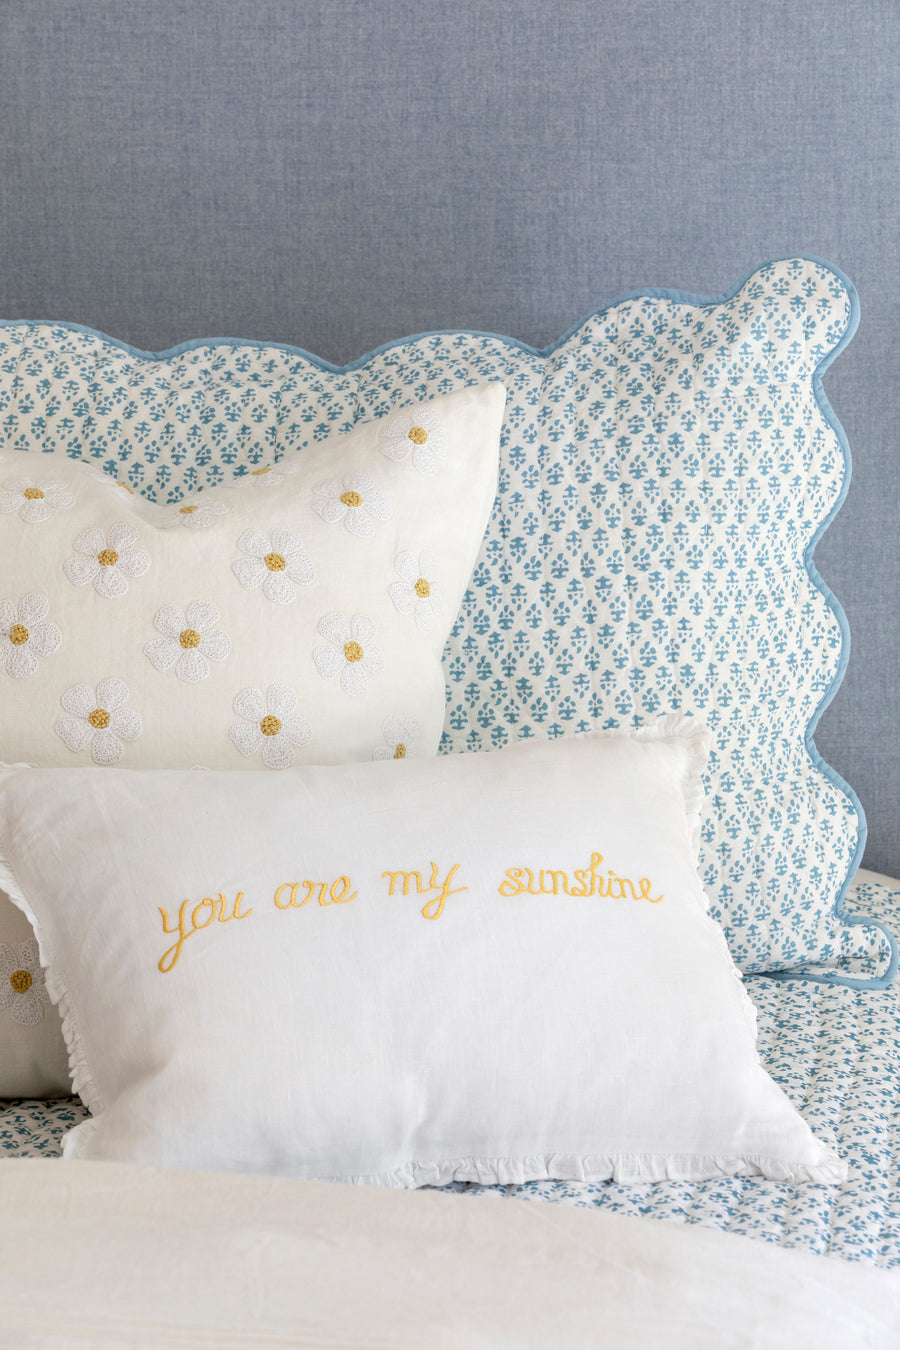 Sunshine Embroidered Pillow